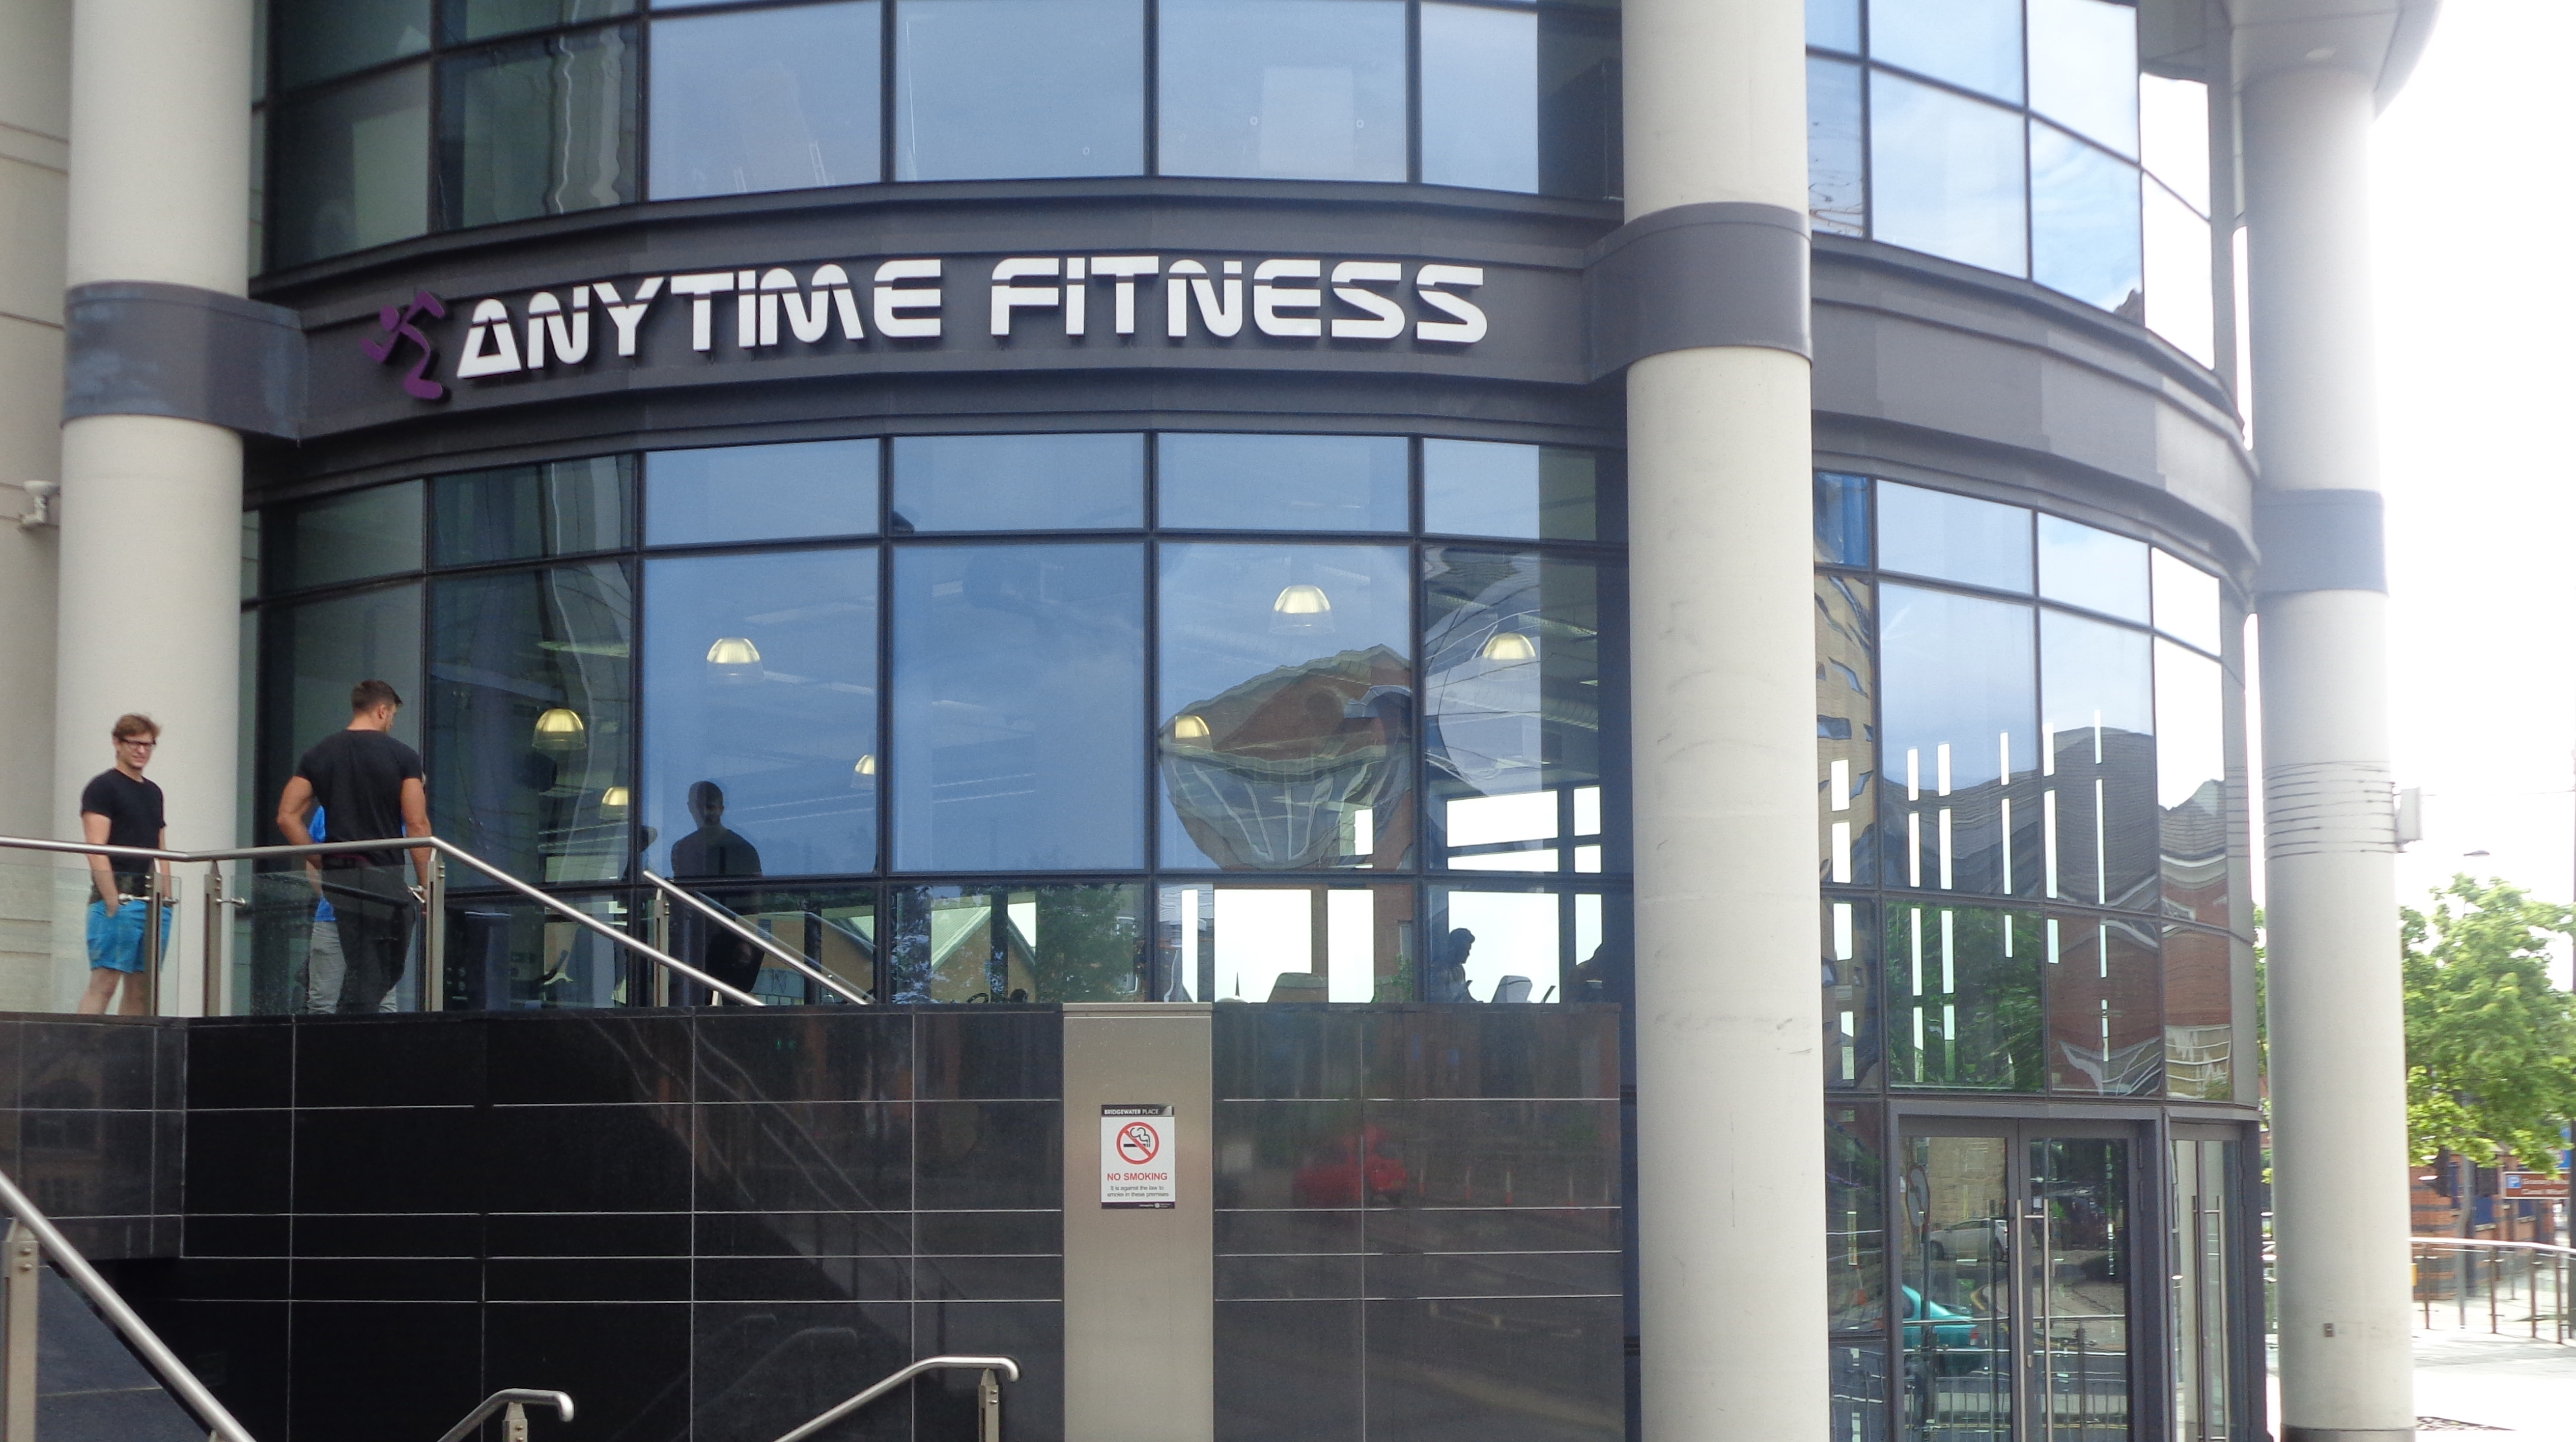 Anytime Fitness to add 20 fitness clubs by end 2017